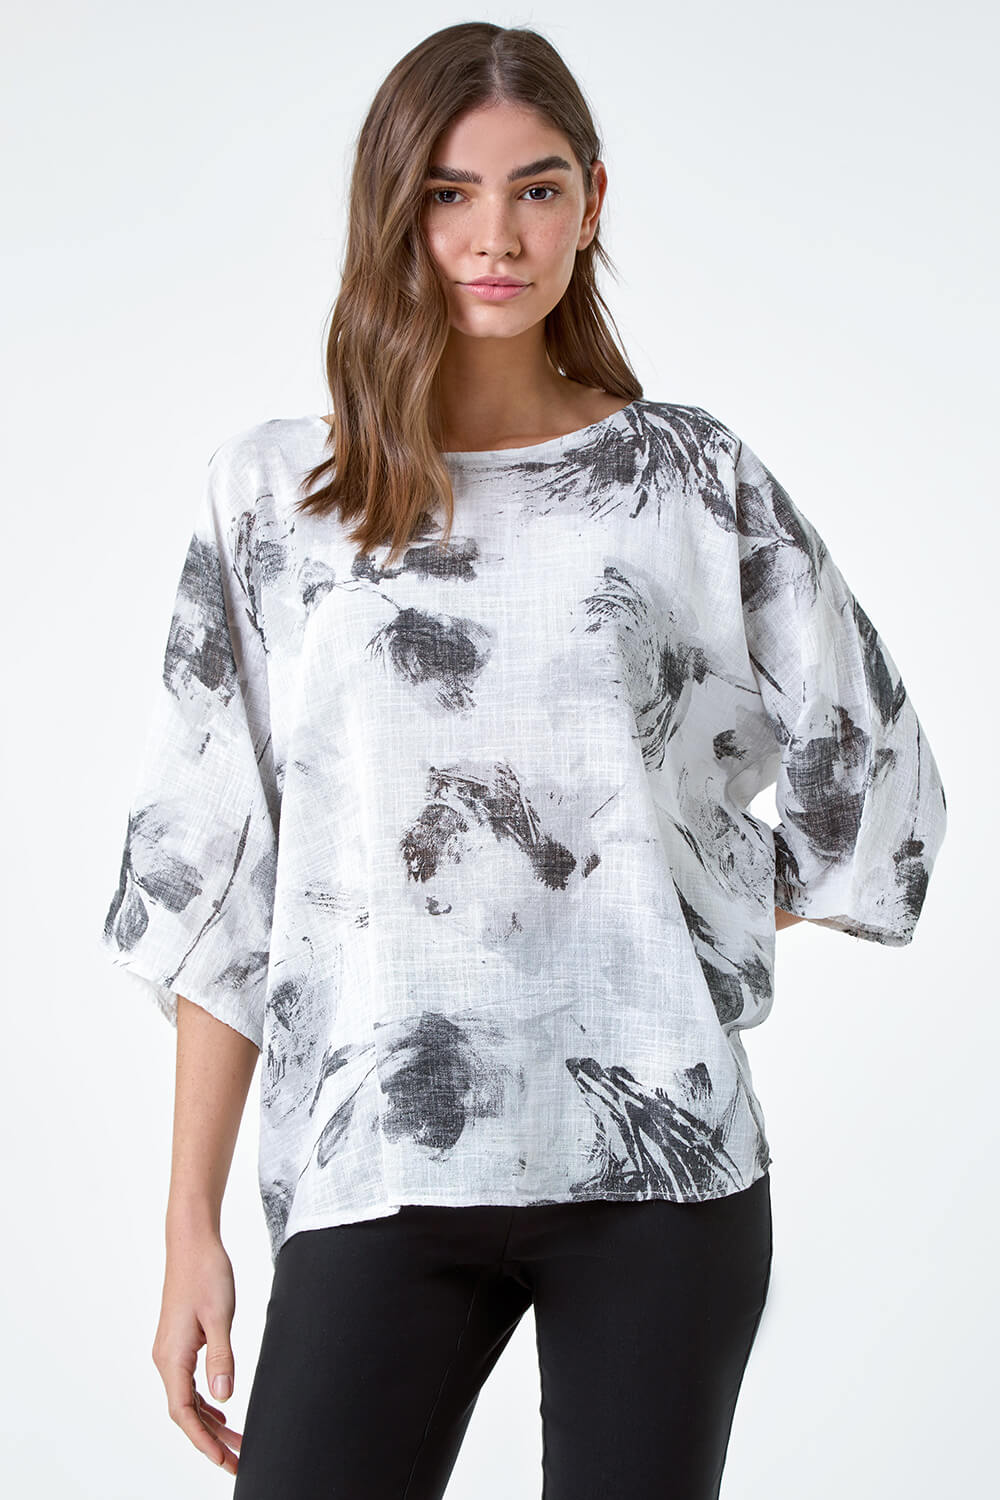 Ivory  Sketchy Floral Print Cotton Tunic Top, Image 4 of 5